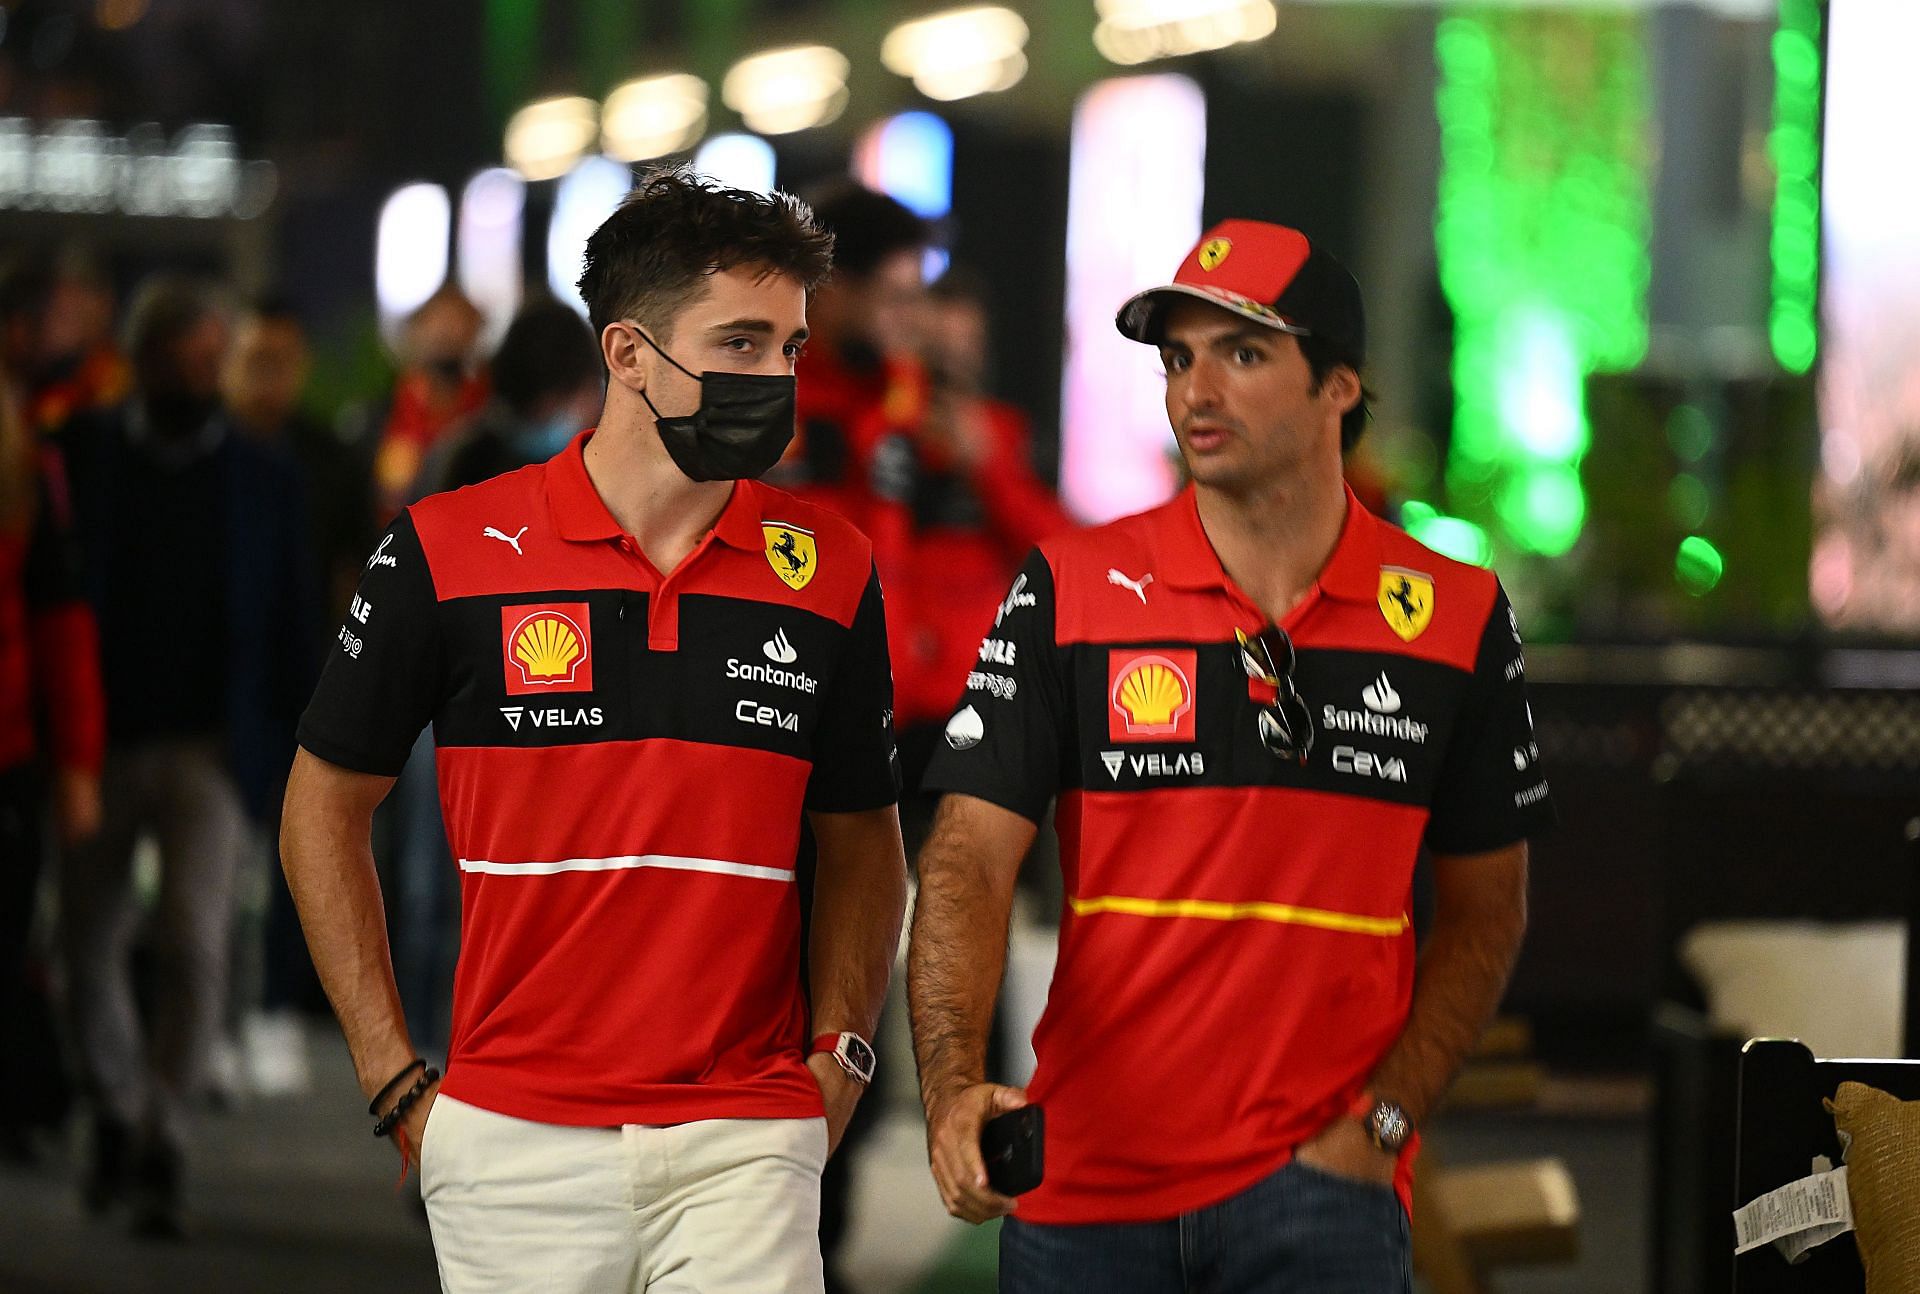 Charles Leclerc (left) and Carlos Sainz Jr. (right) during the F1 Grand Prix of Saudi Arabia - Practice